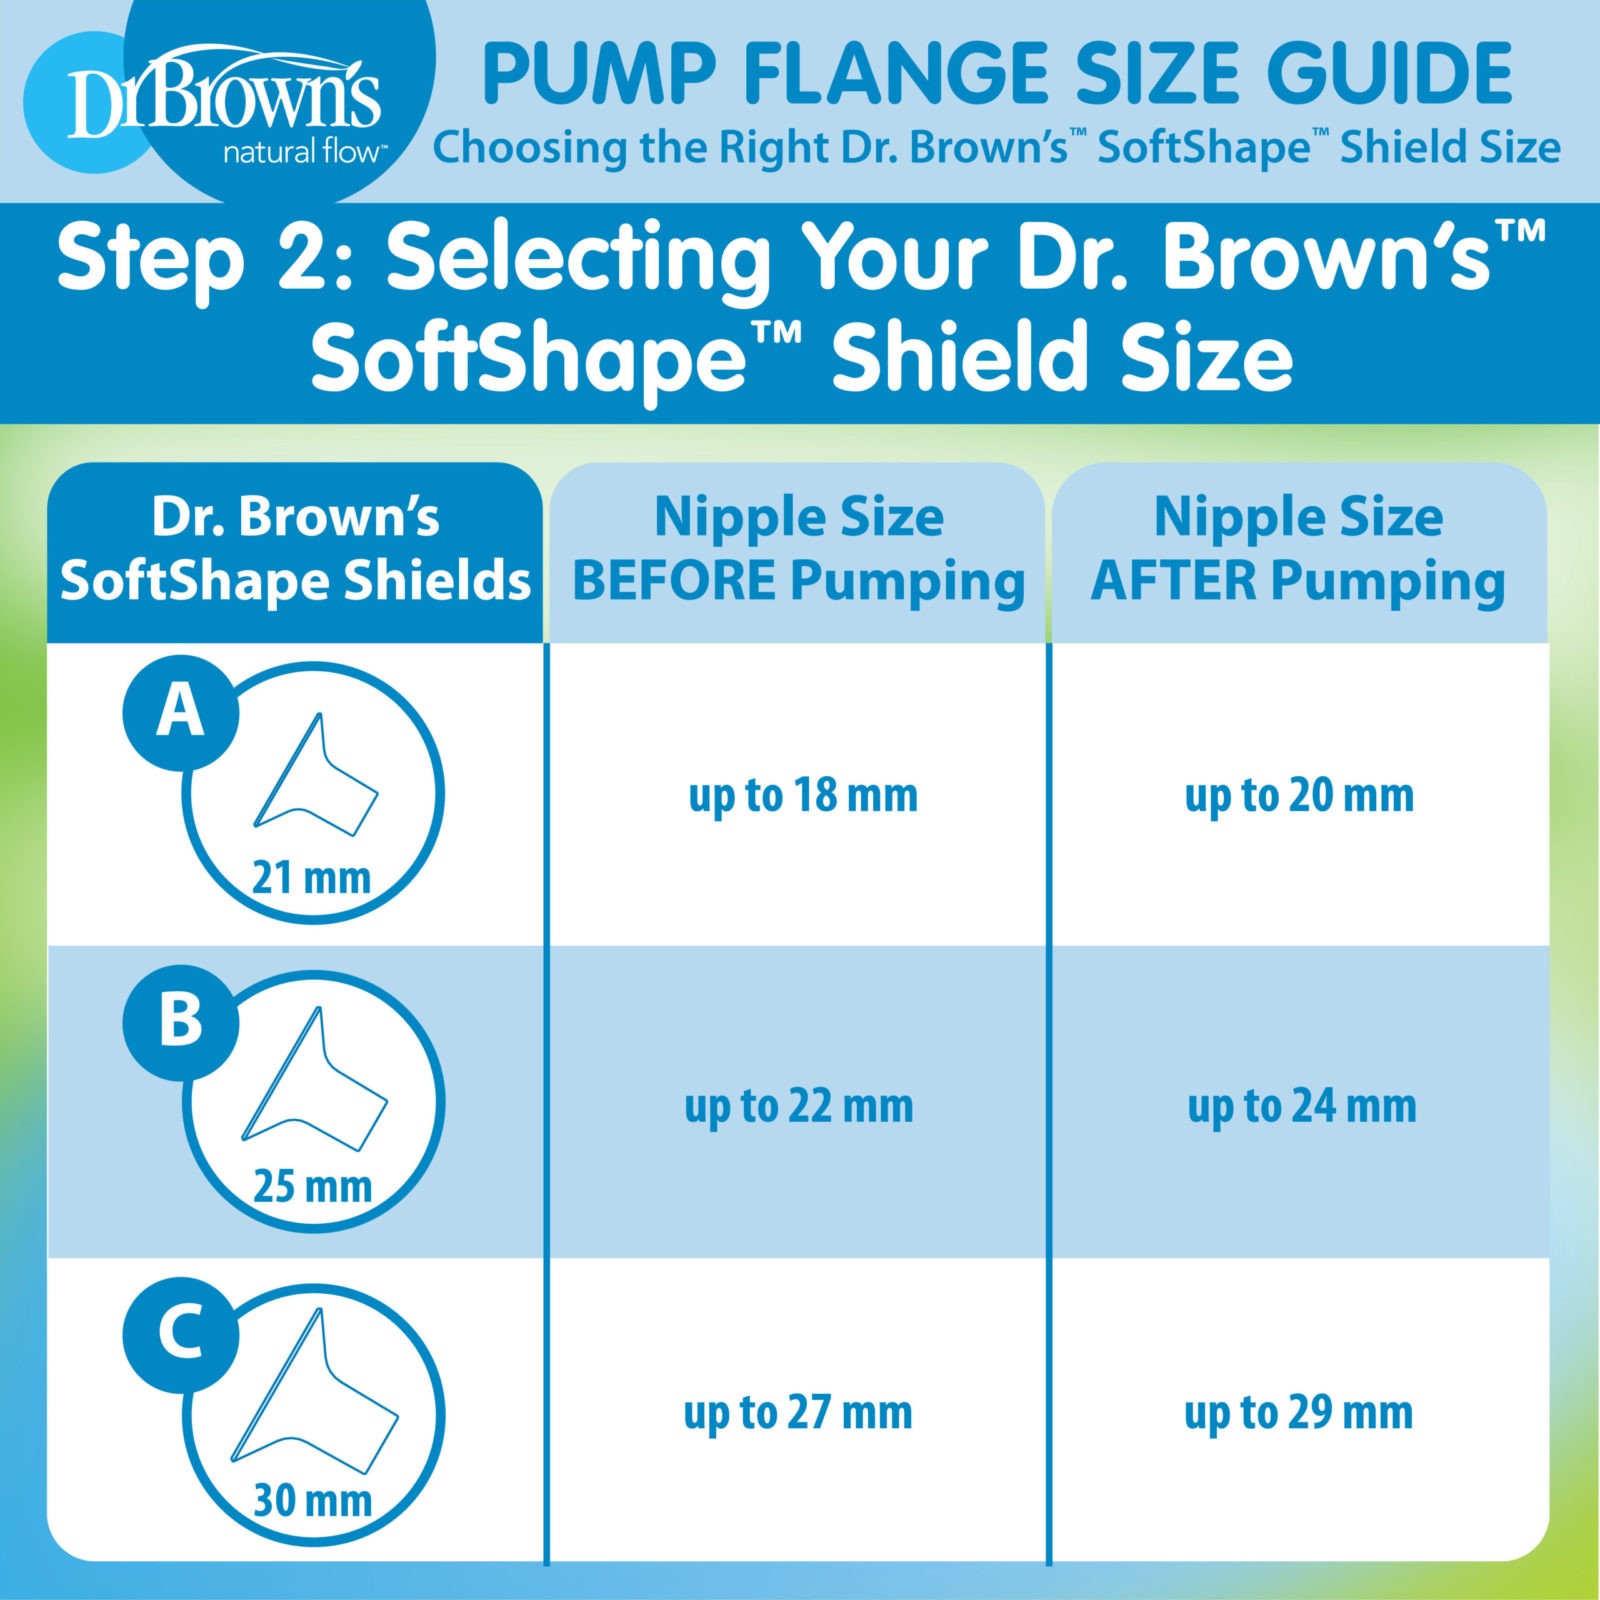 How to Find the Right Breast Pump Flange Size